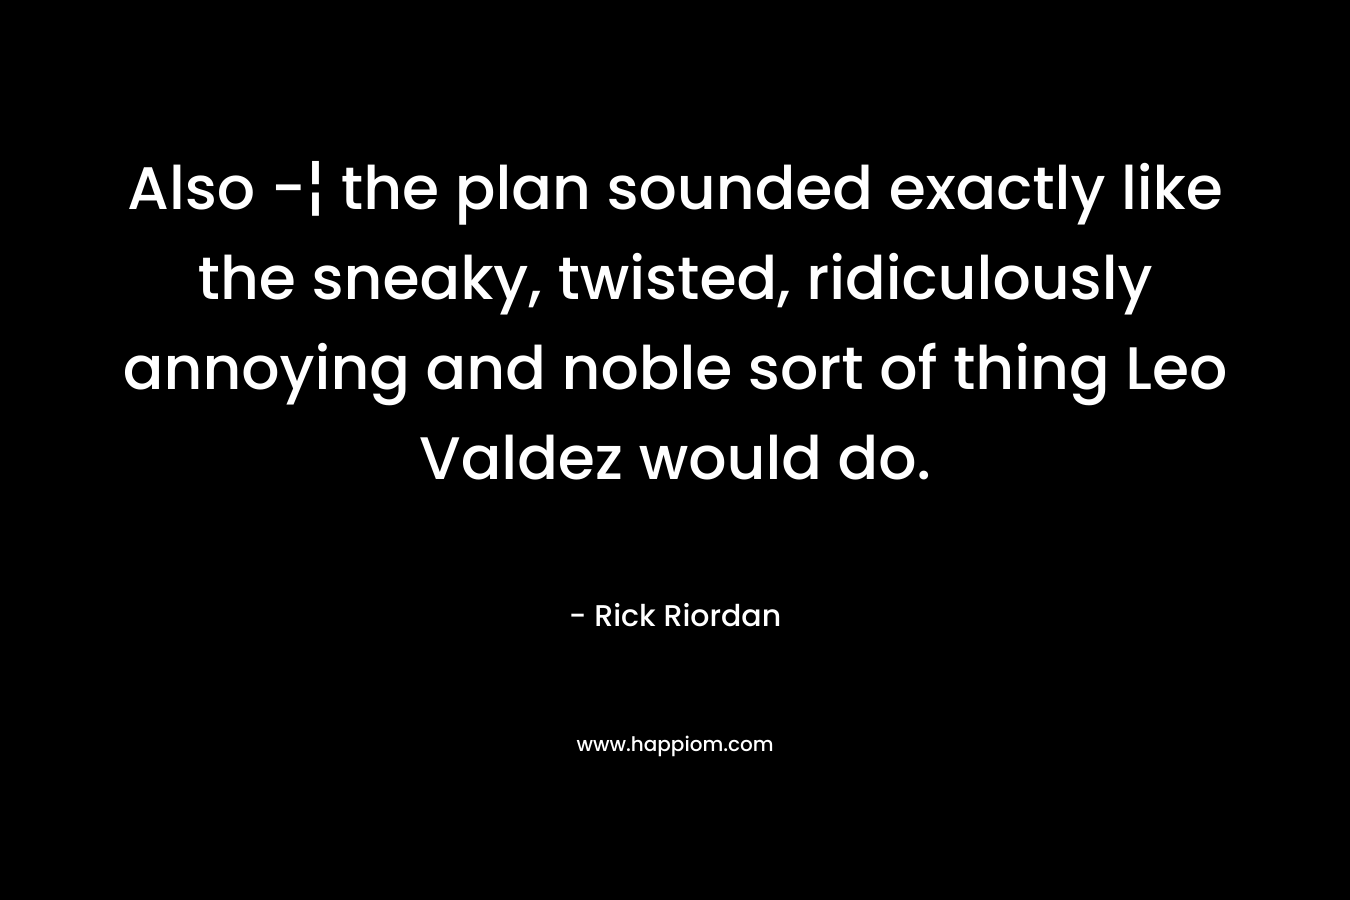 Also -¦ the plan sounded exactly like the sneaky, twisted, ridiculously annoying and noble sort of thing Leo Valdez would do. – Rick Riordan